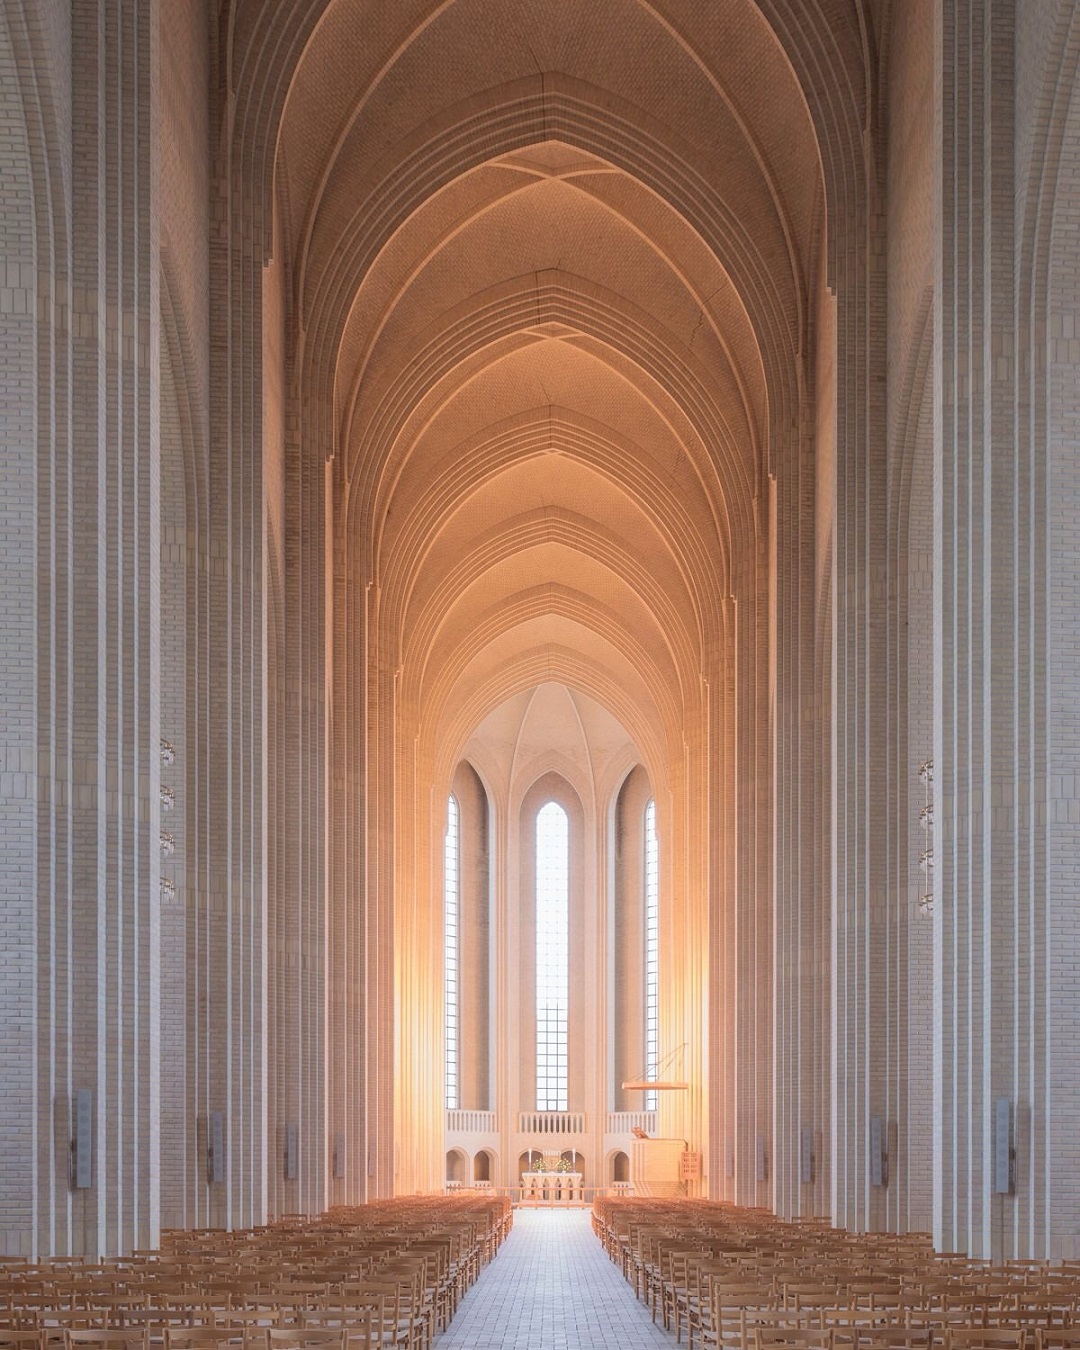 Grundtvig's Church In Copenhagen, Denmark, Completed In 1940, And Its Design Is A Combination Between A Cathedral And The Style Of Old Danish Country Houses